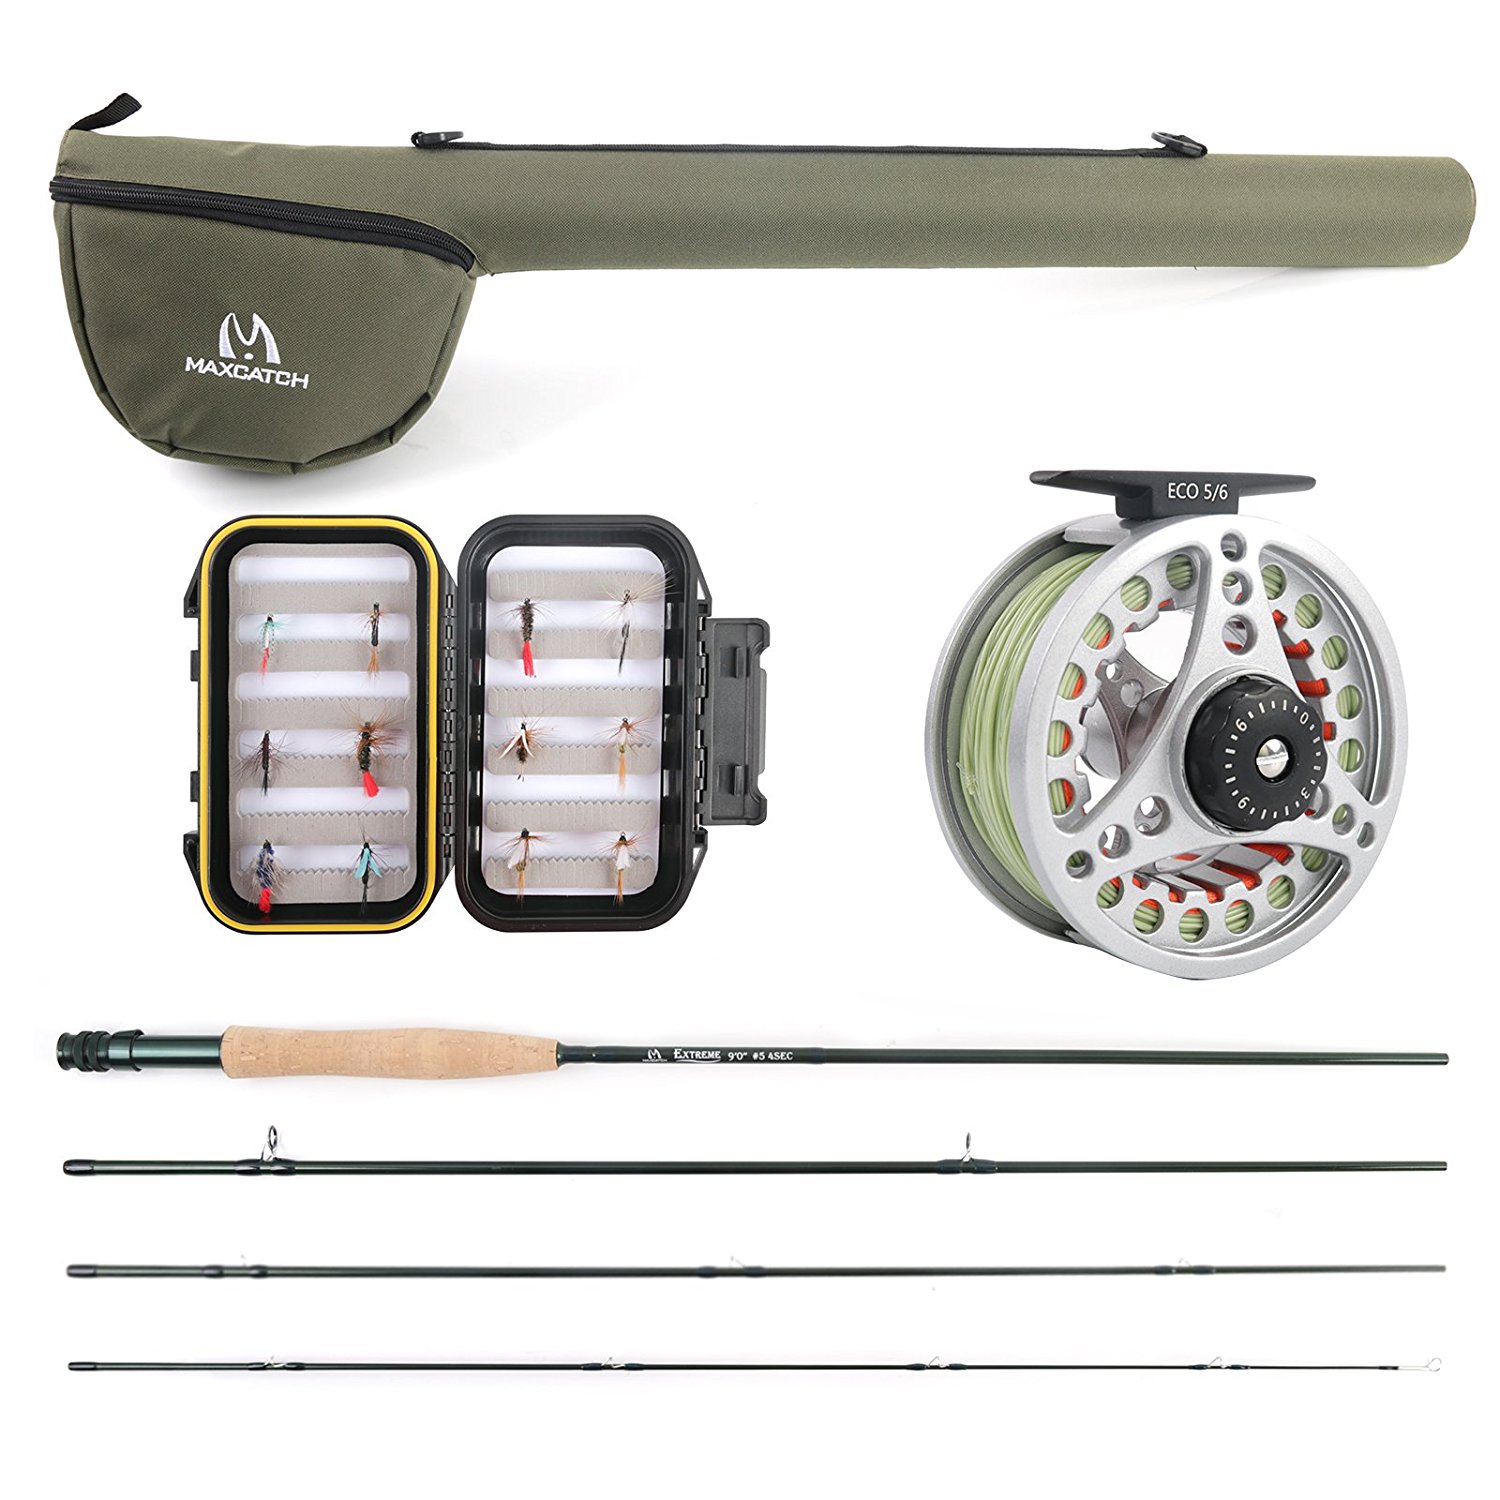 Complete W Class  Starter Fishing Tackle Set & Tackle Rod Reel Net 10ft  kit567